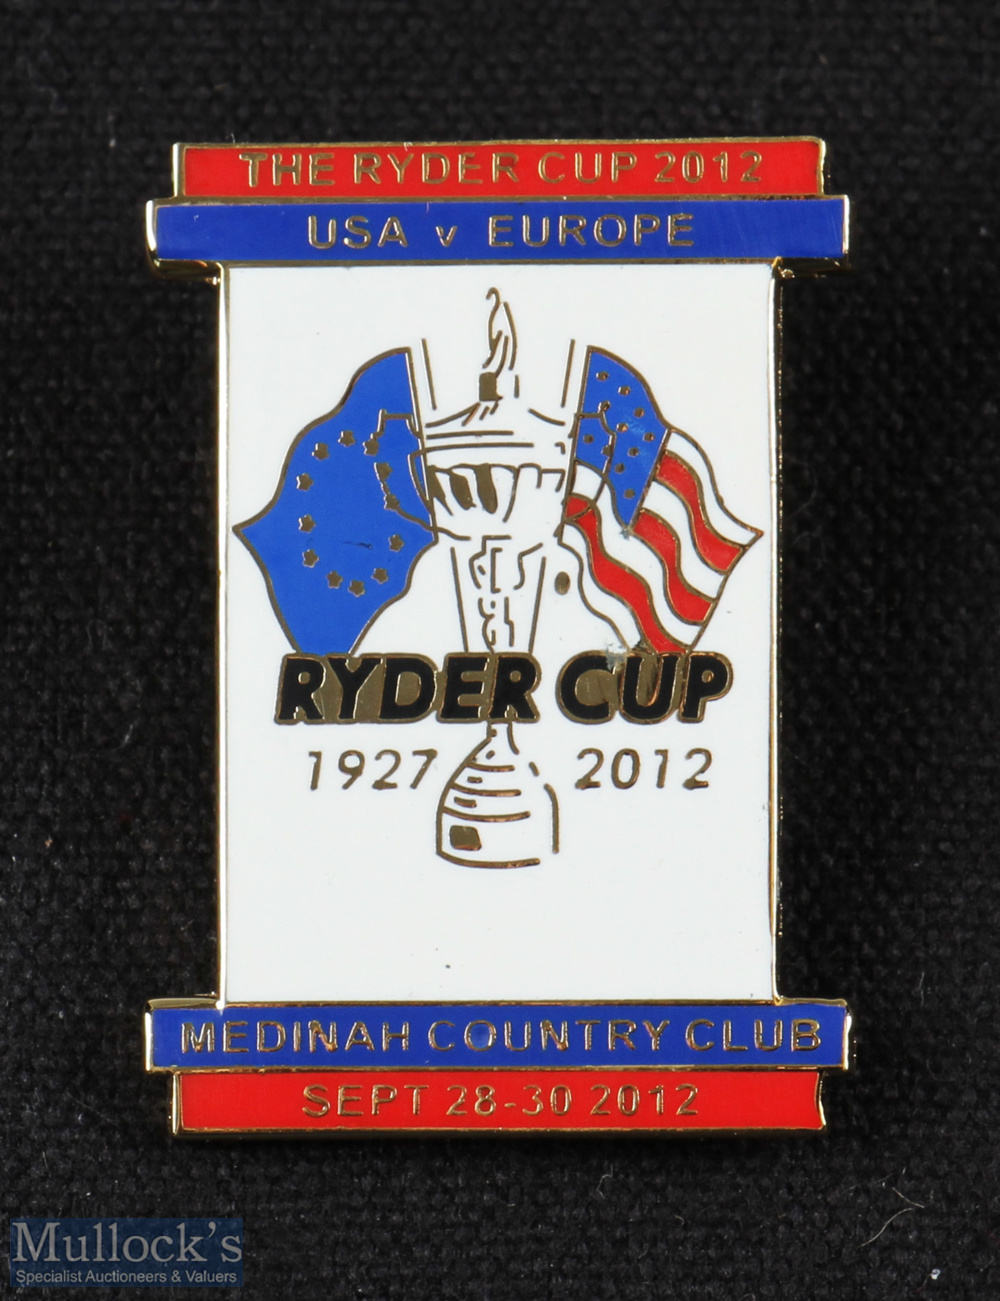 2012 Ryder Cup brass and enamel pin badge - played at The Medinah Country Club Chicago with Europe